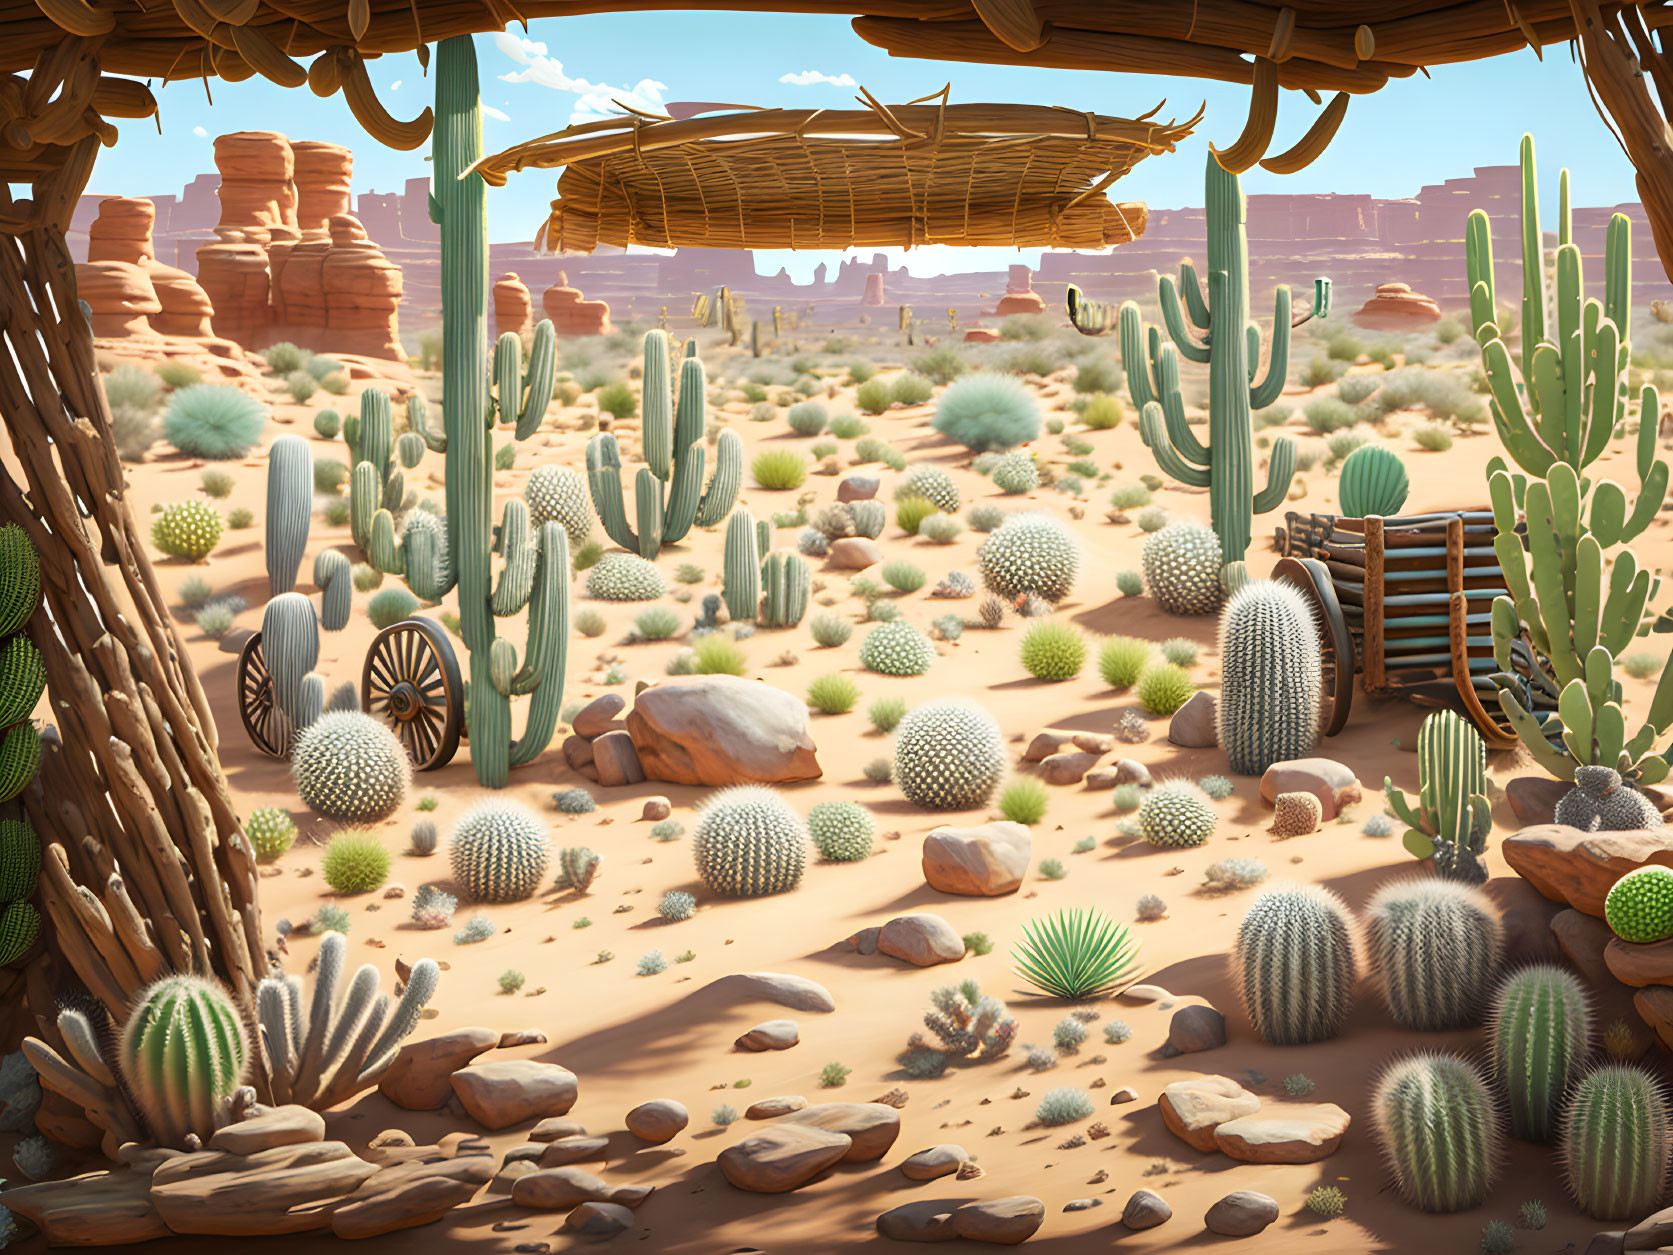 Desert landscape with cacti, rocks, wooden cart, and canopy structure